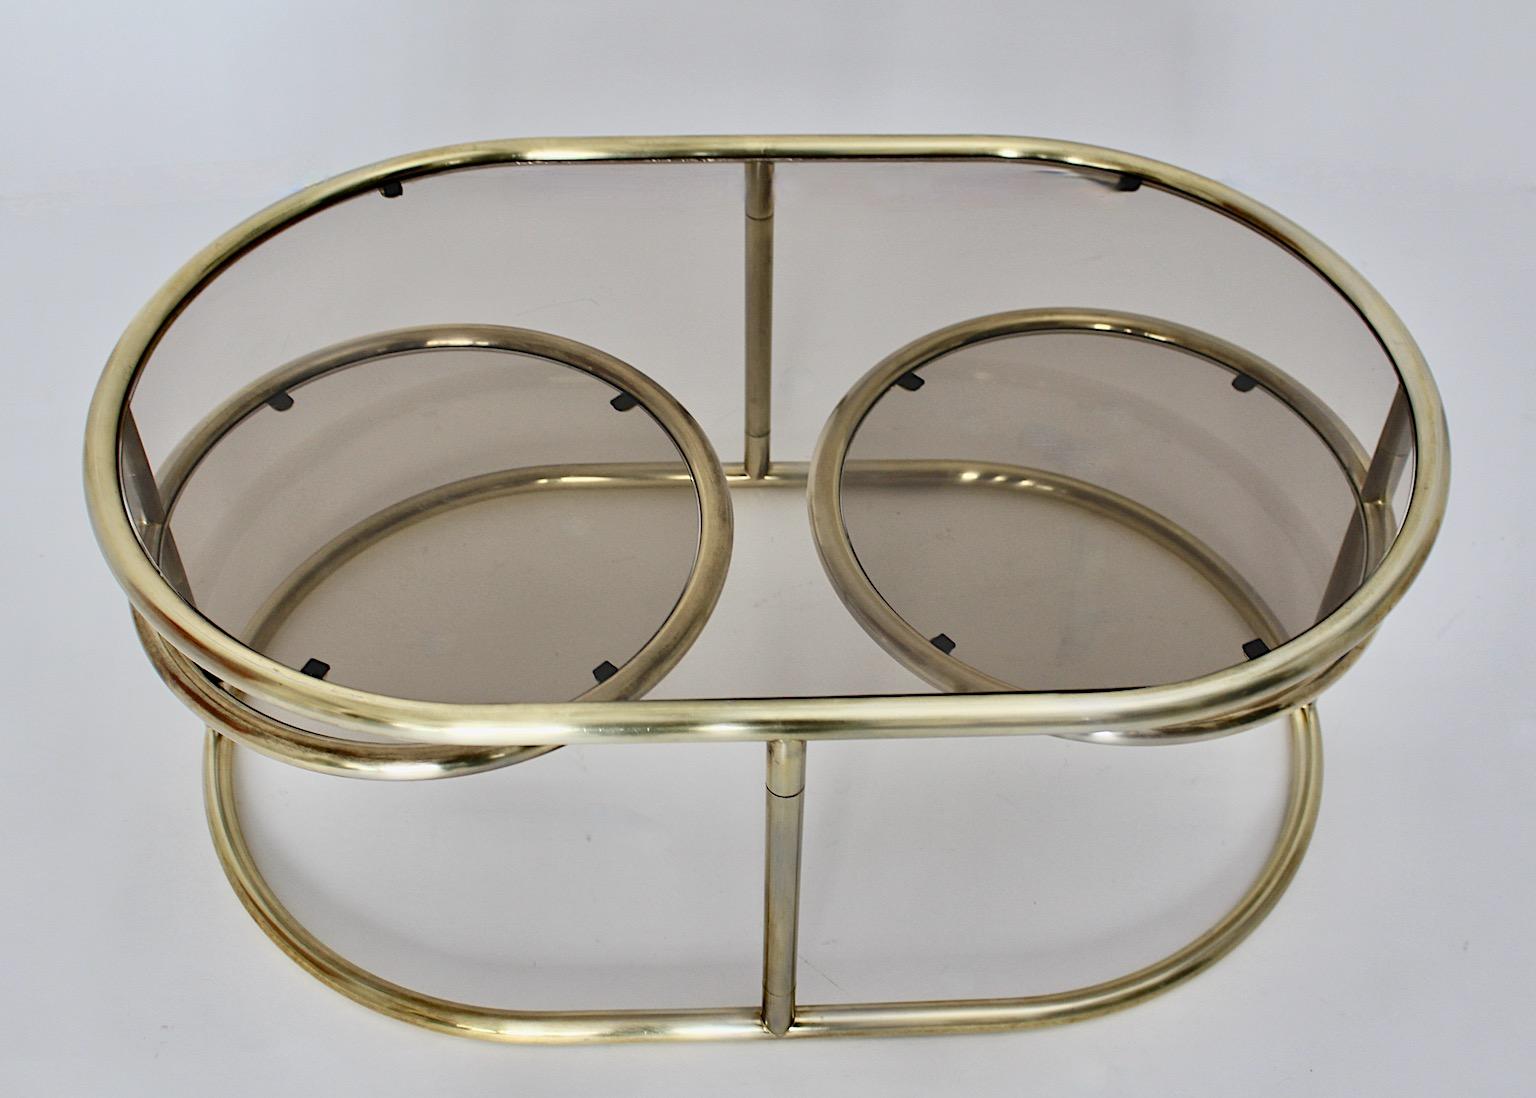 Modernist Vintage Golden Metal Glass Oval Coffee Table Sofa Table, 1960s, Italy For Sale 1